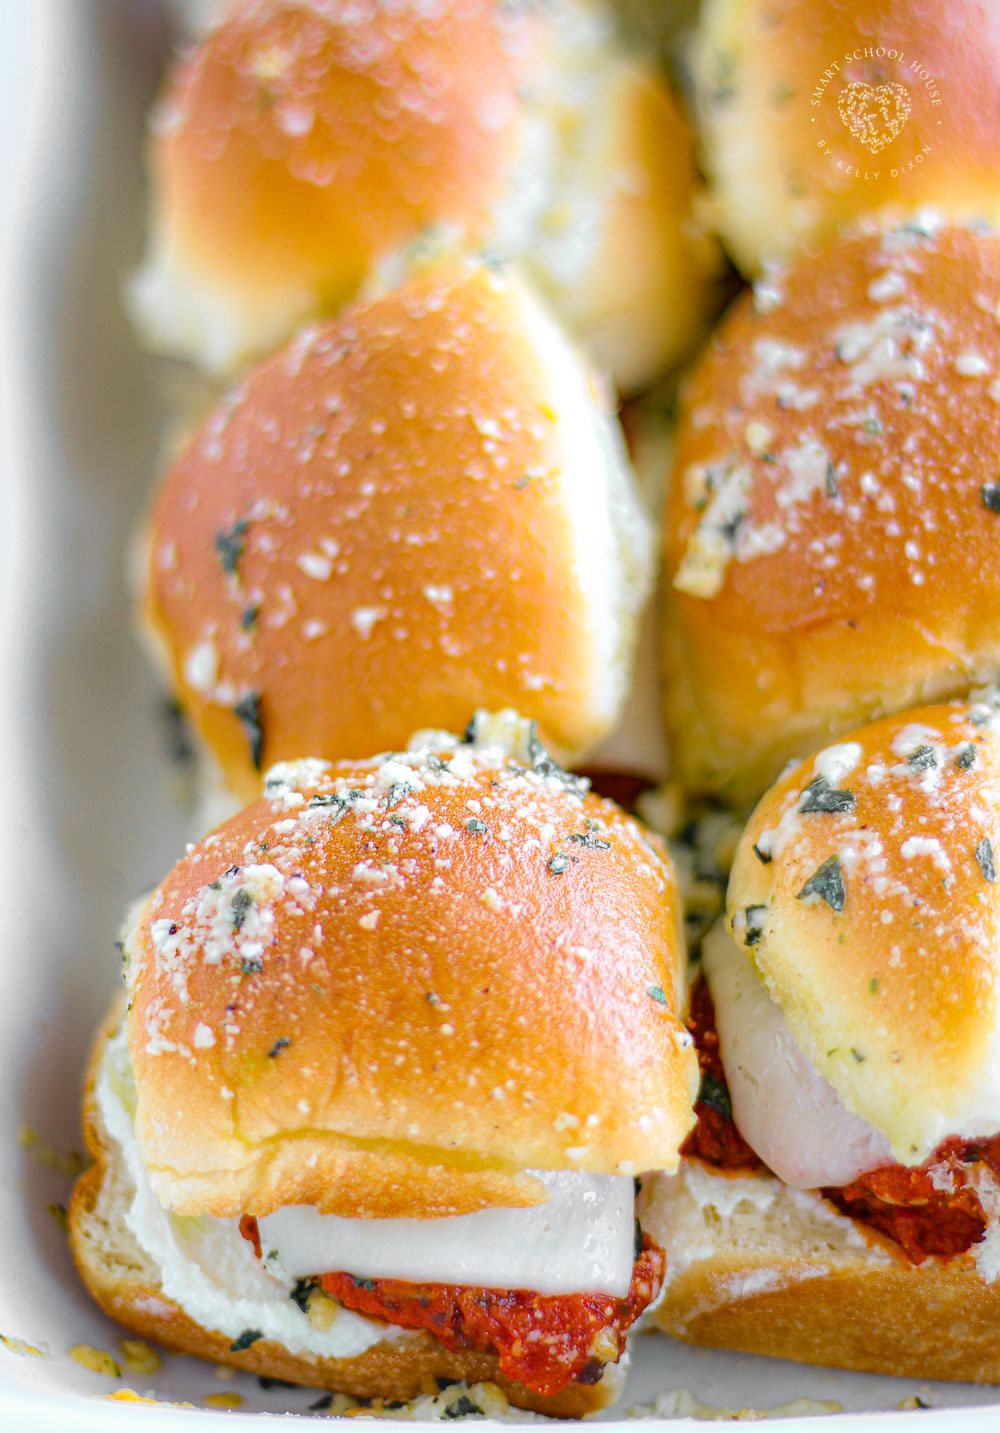 Cheesy Meatball Sliders - These cheesy, garlic butter mini meatball subs are perfect for parties, snacks and weeknight meals + holidays! Easily homemade and delicious recipe!